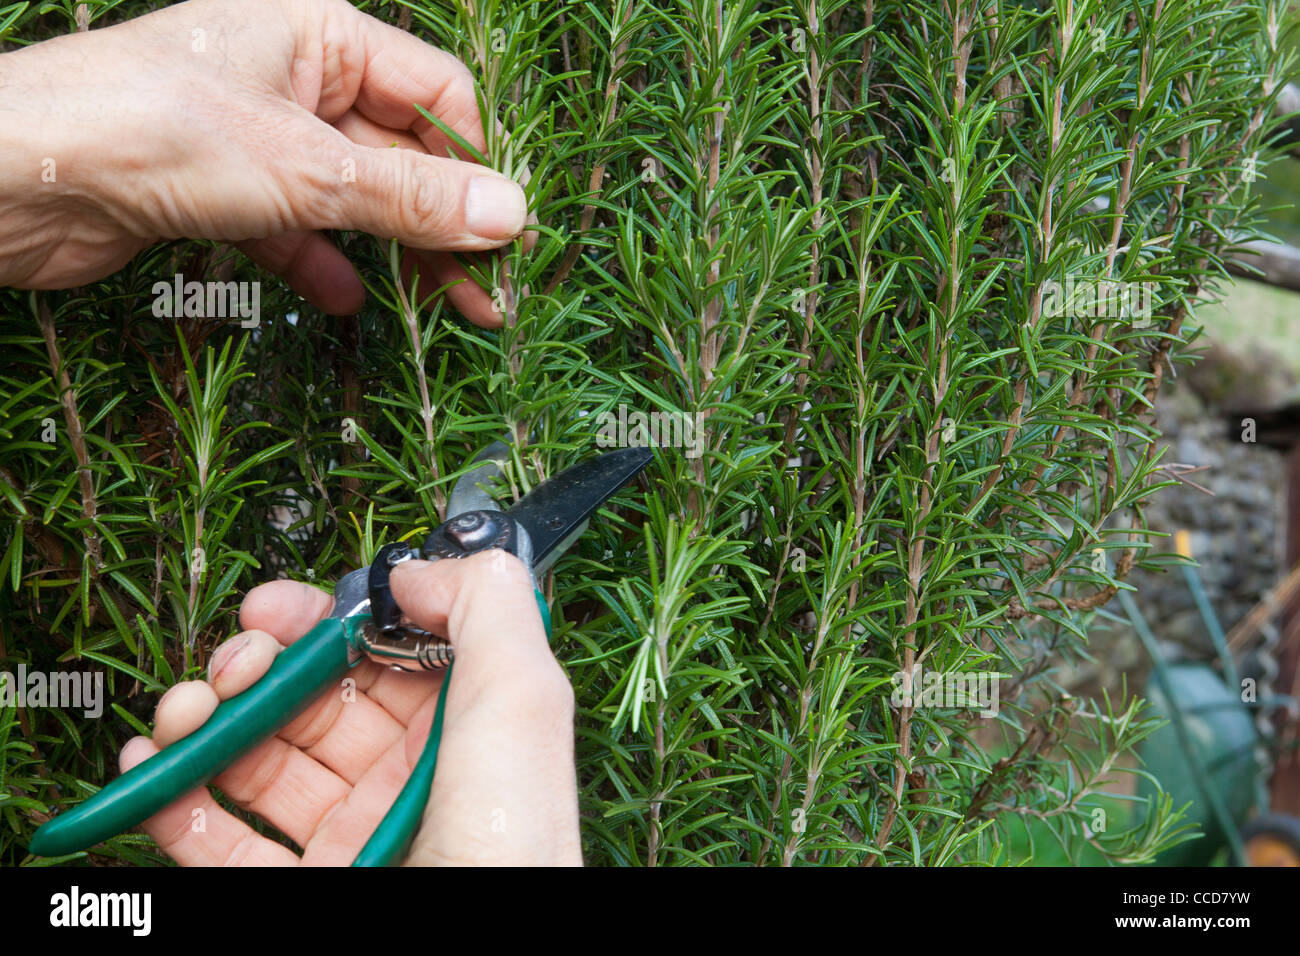 Talee of rosemary, step 1, take the sprigs of rosemary from mother tree Stock Photo